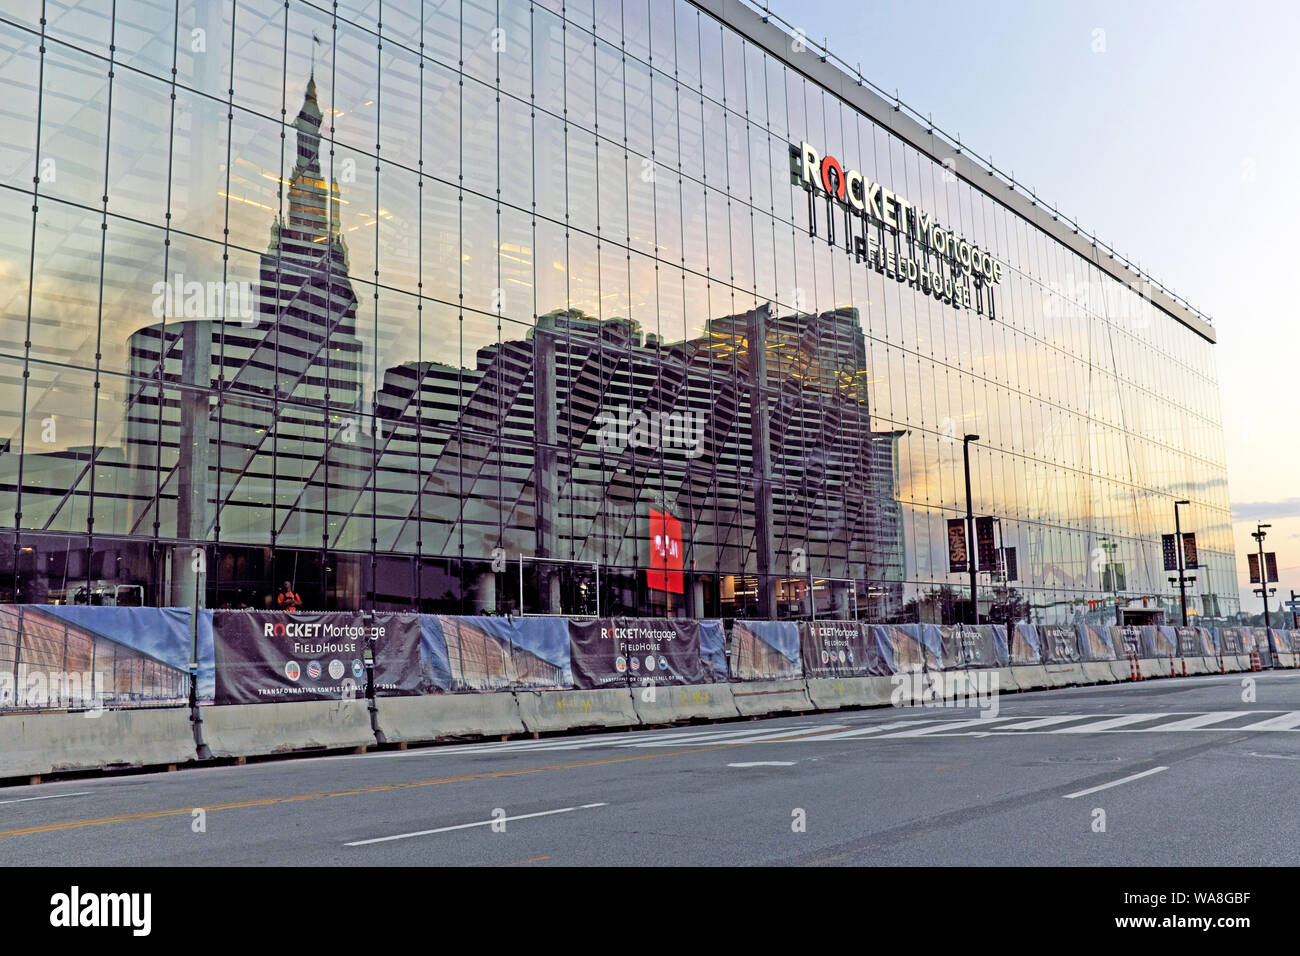 The Rocket Mortgage Fieldhouse, previously Gund Arena and the Q, renovations near completion with the new window wall reflecting the city skyline. Stock Photo